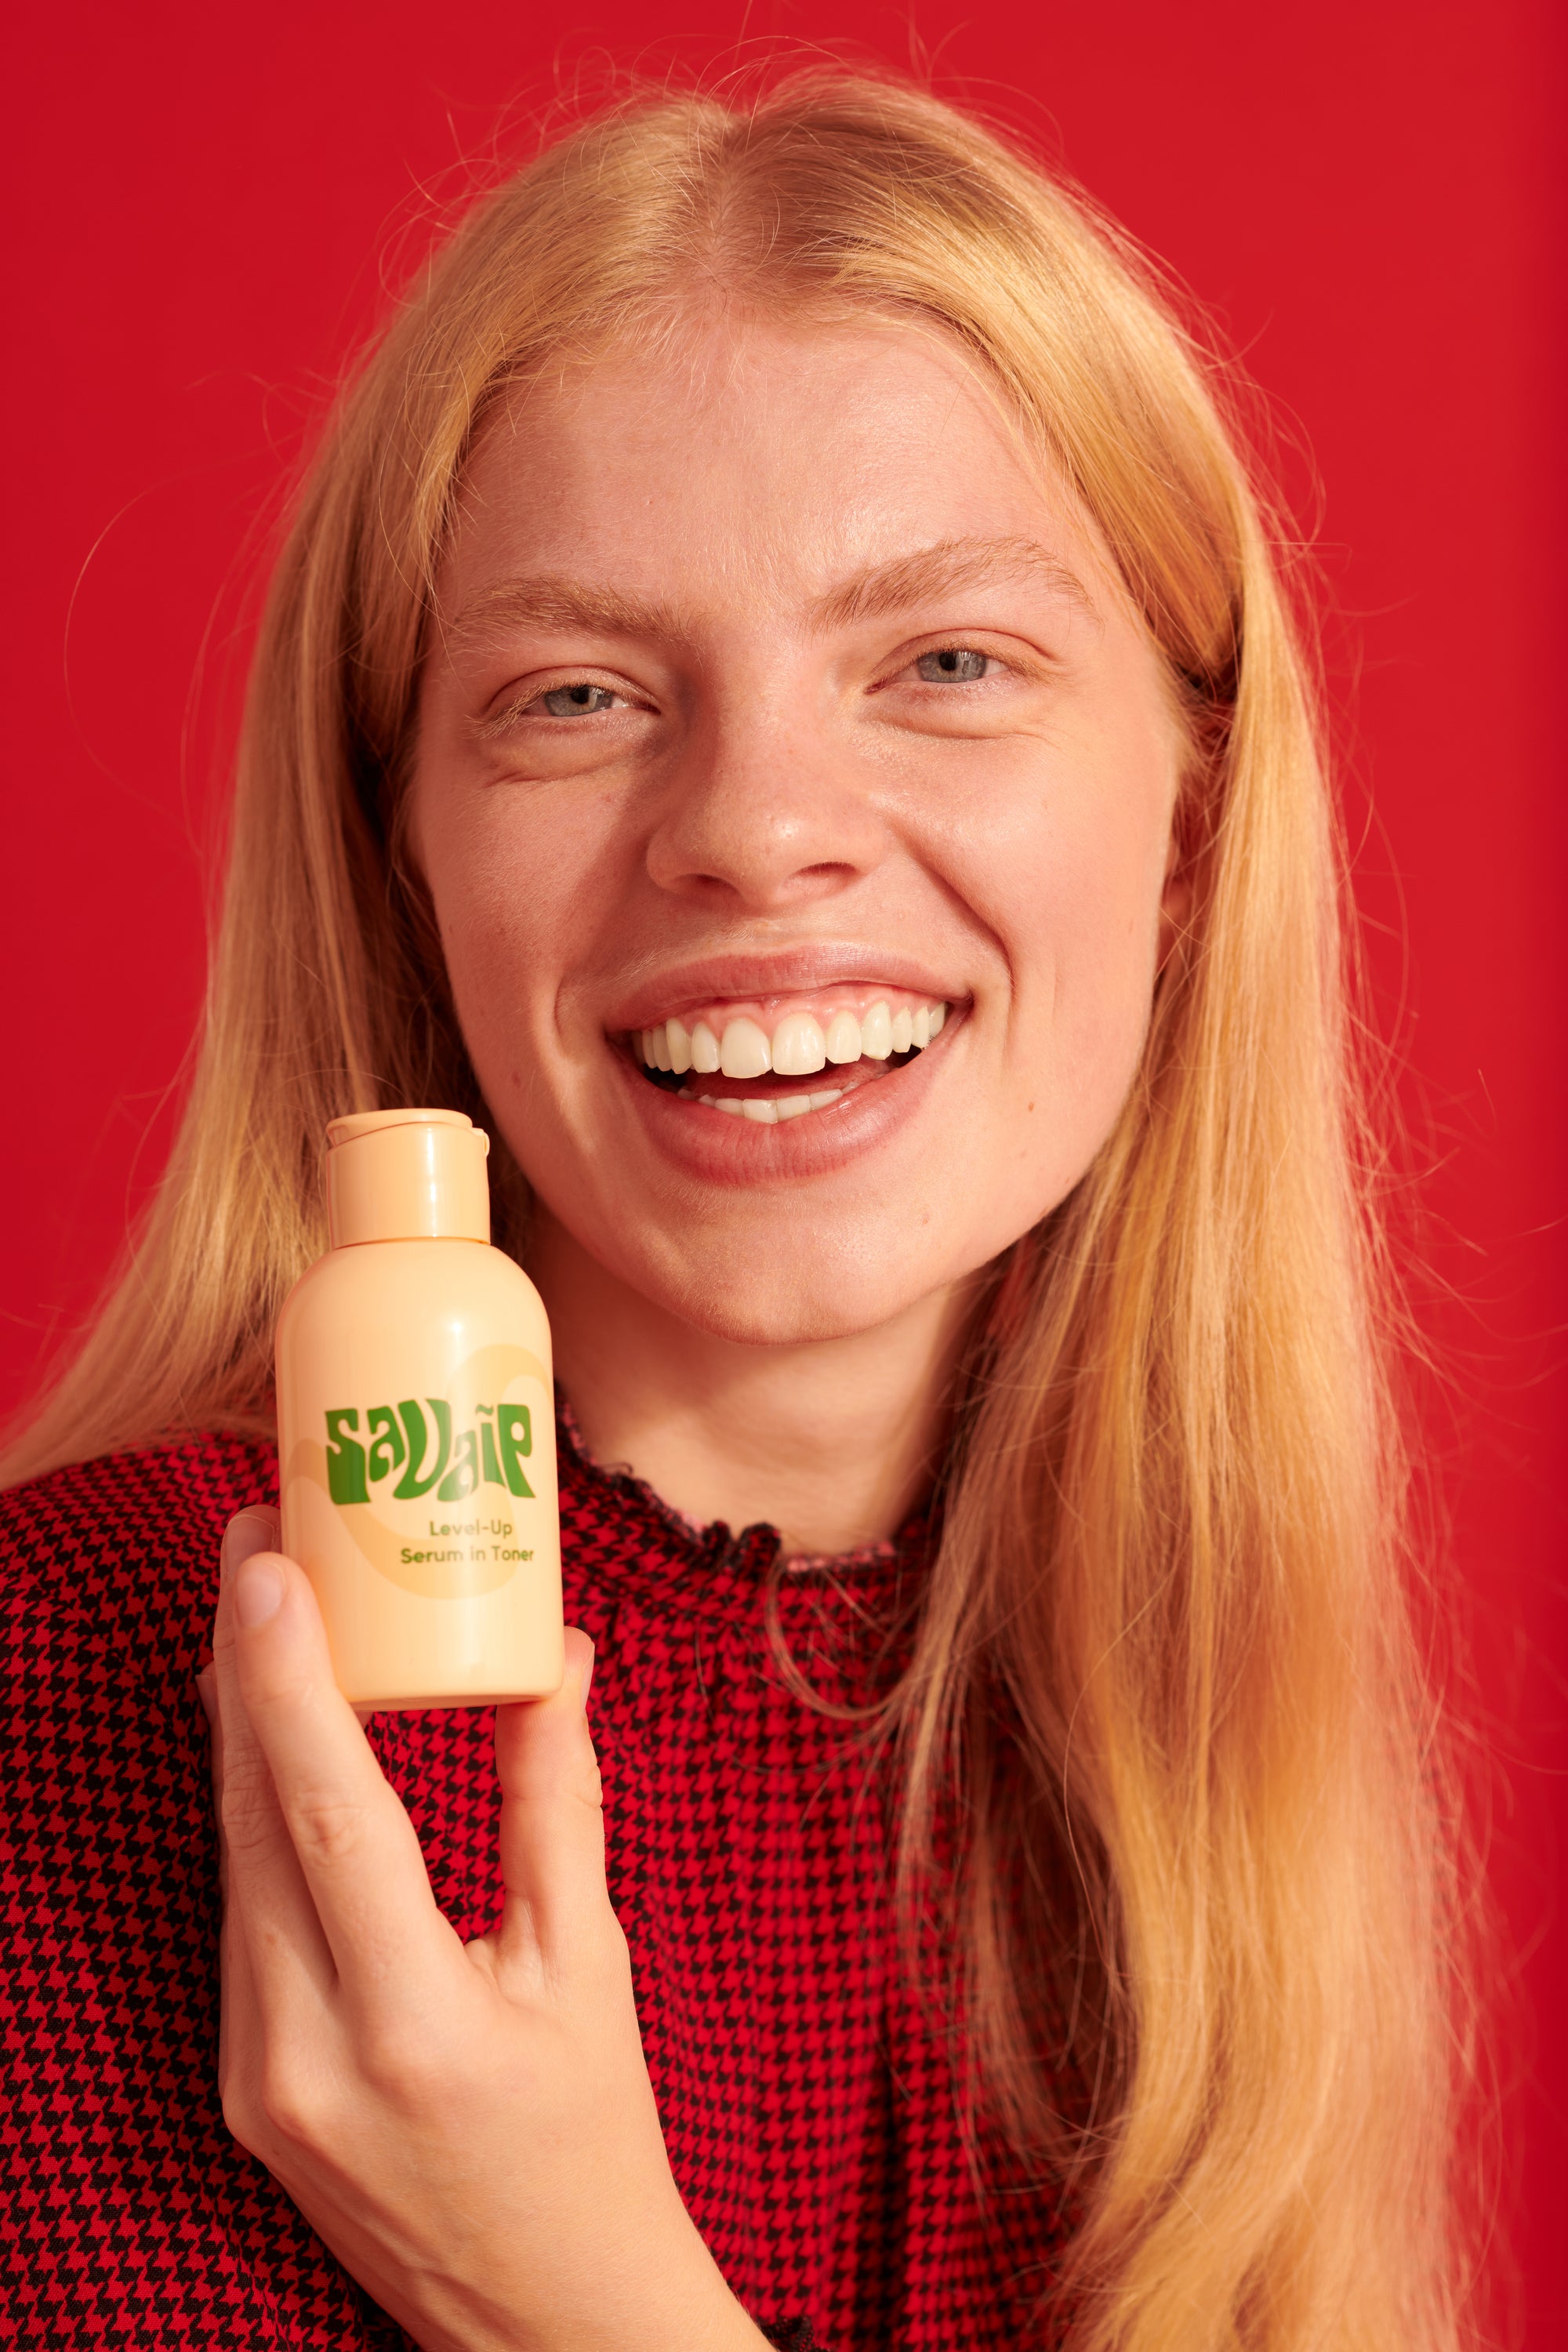 A person with long blonde hair and a joyful expression, holding a beige Savaip skincare bottle labeled Level-Up Serum in Toner, wearing a red houndstooth-patterned top against a red background.